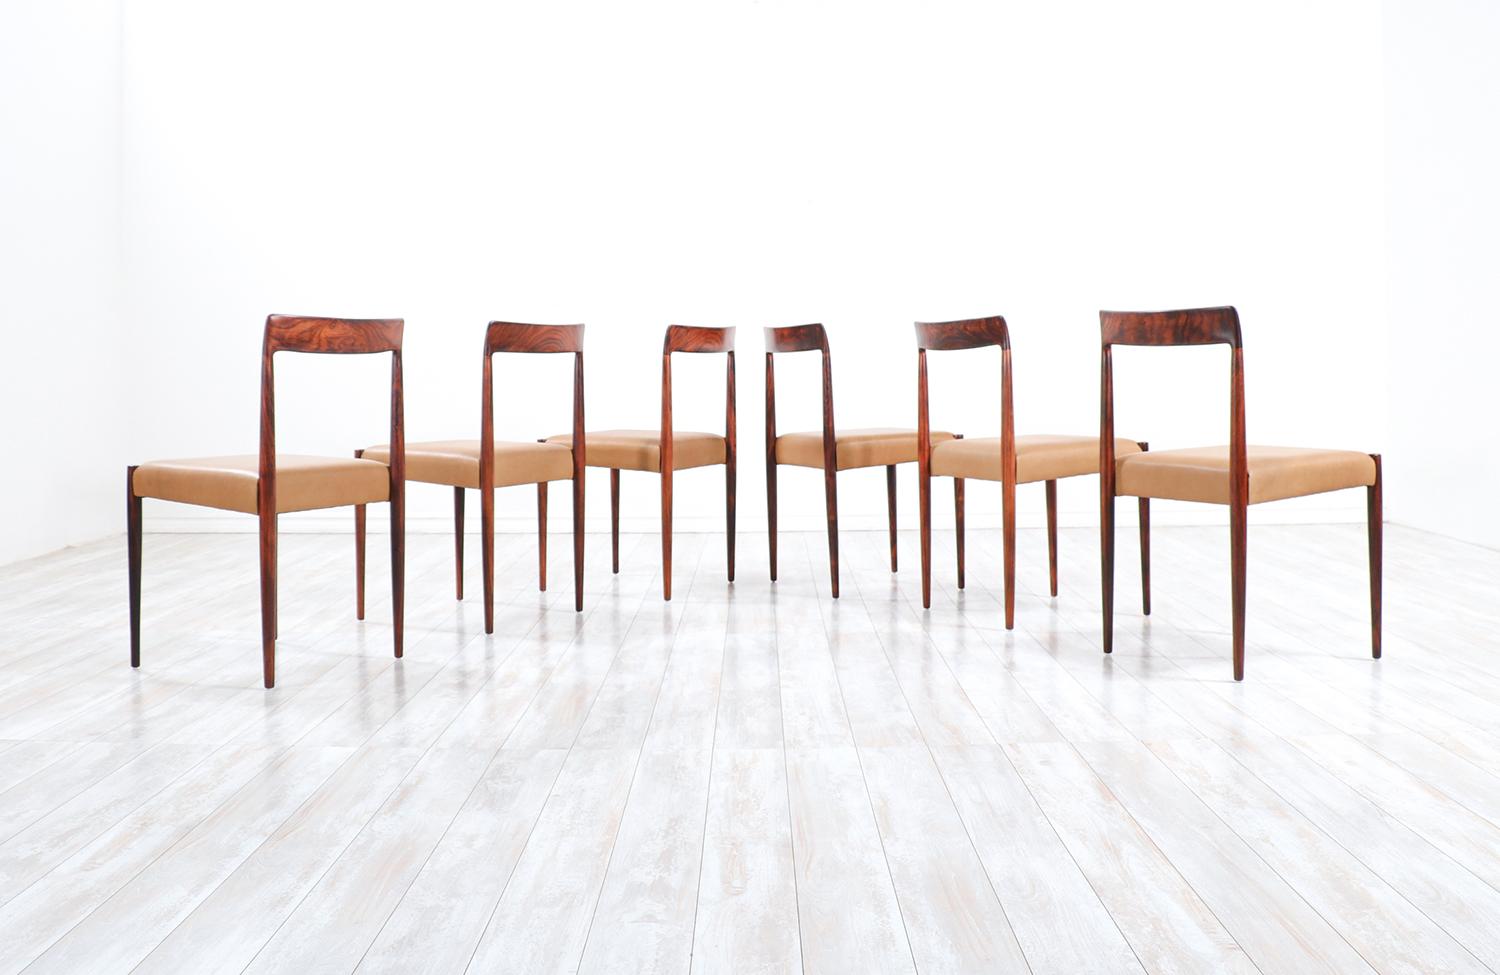 Mid-20th Century Set of 10 Mid-Century Modern Rosewood and Leather Dining Chairs by Lübke